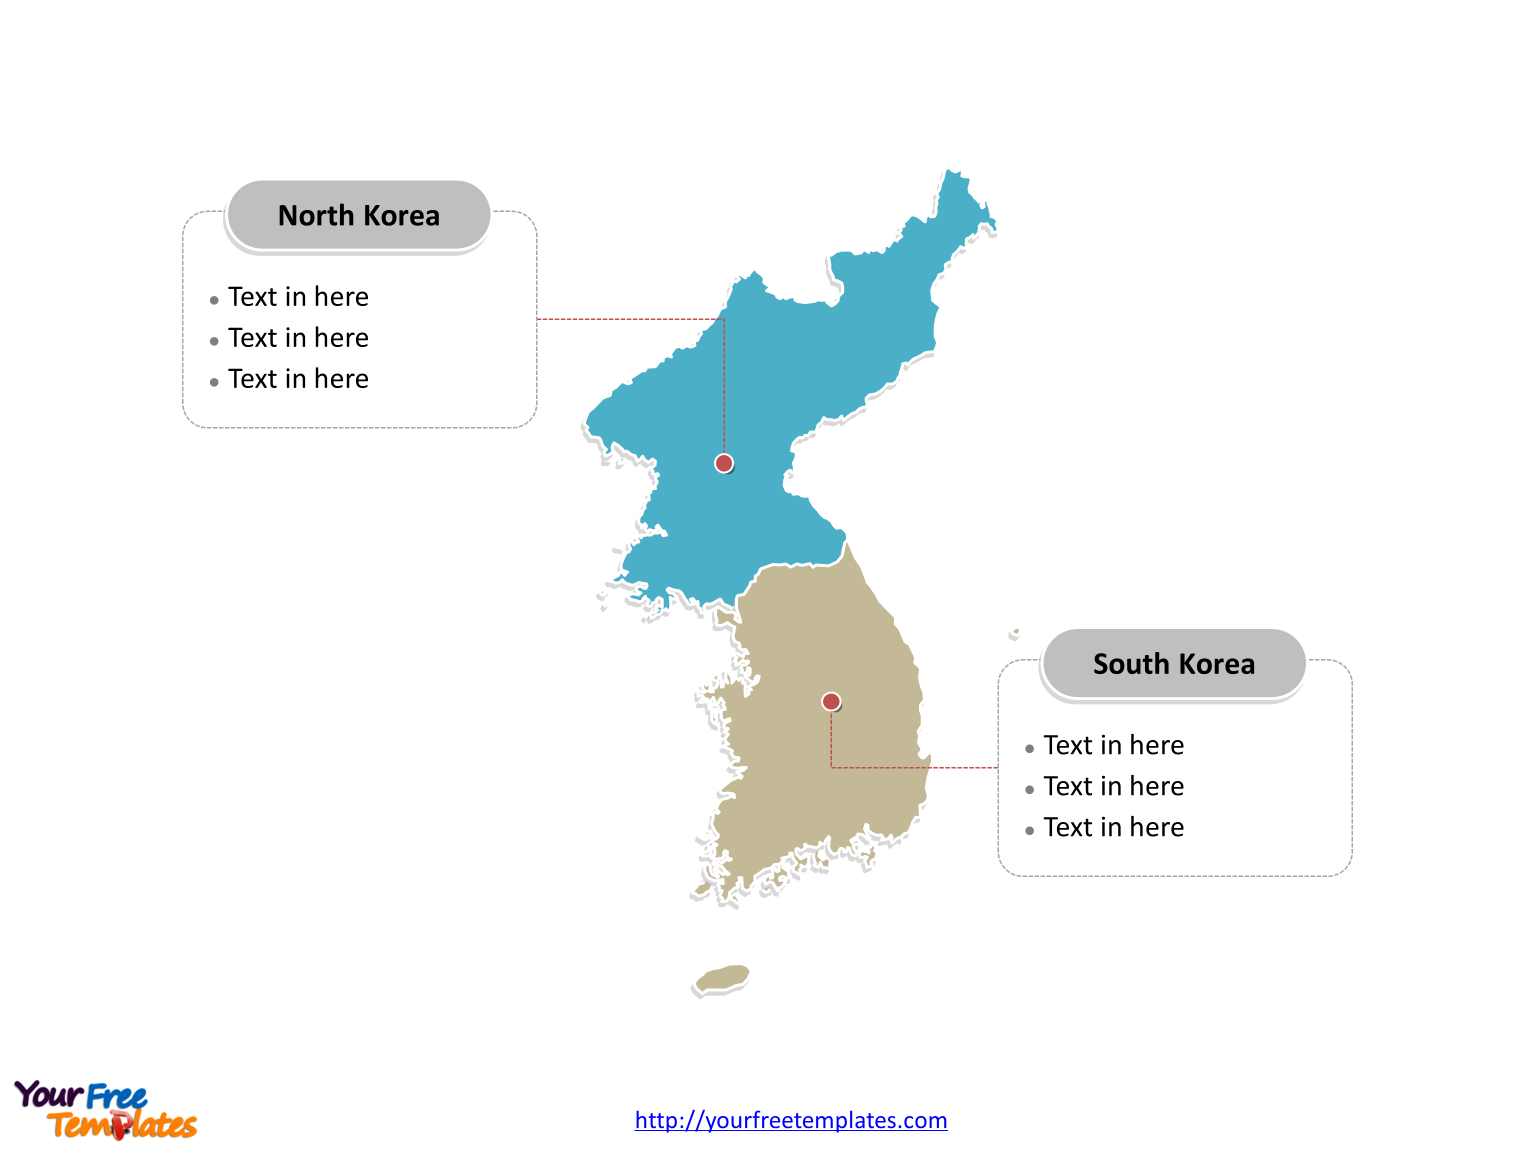 Korea Peninsula Political map labeled with two countries